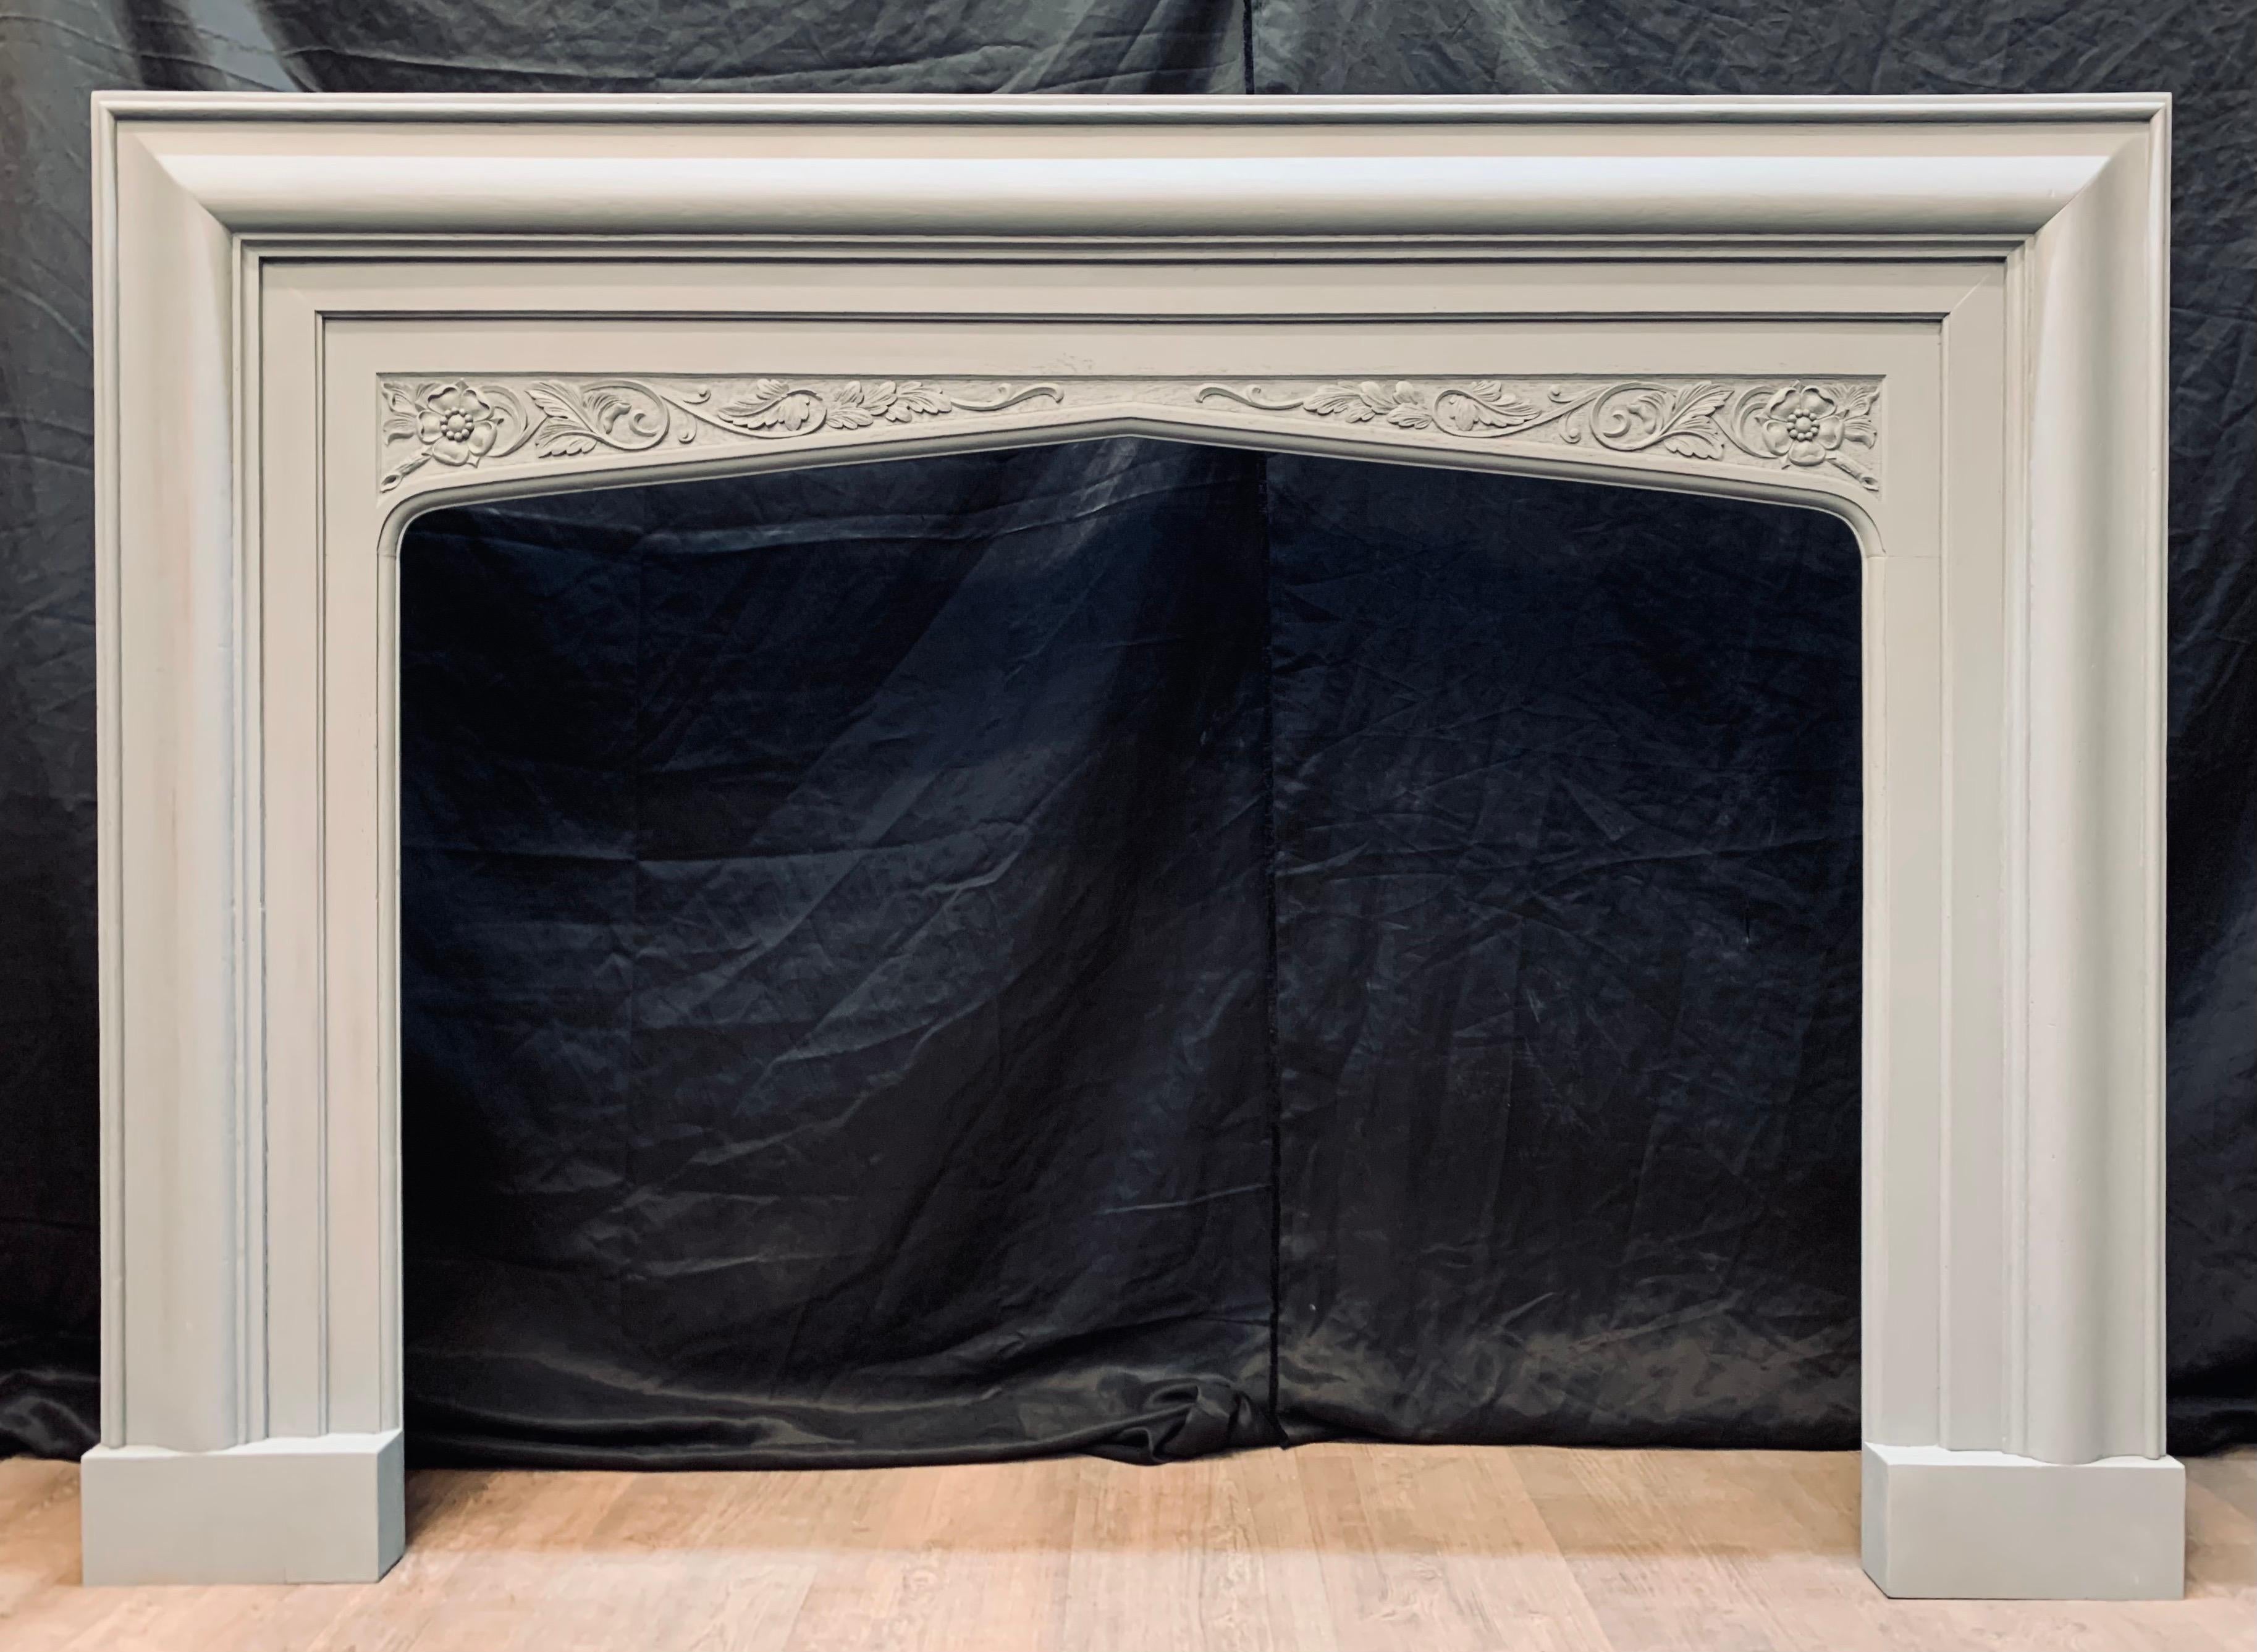 A well balanced and wide solid English oak Edwardian Gothic Revival manner bolection fireplace surround. A fairly deep return frame lends this piece a sense of grandeur, a bolection outer frame with an internal lambs tongue slip that creates a